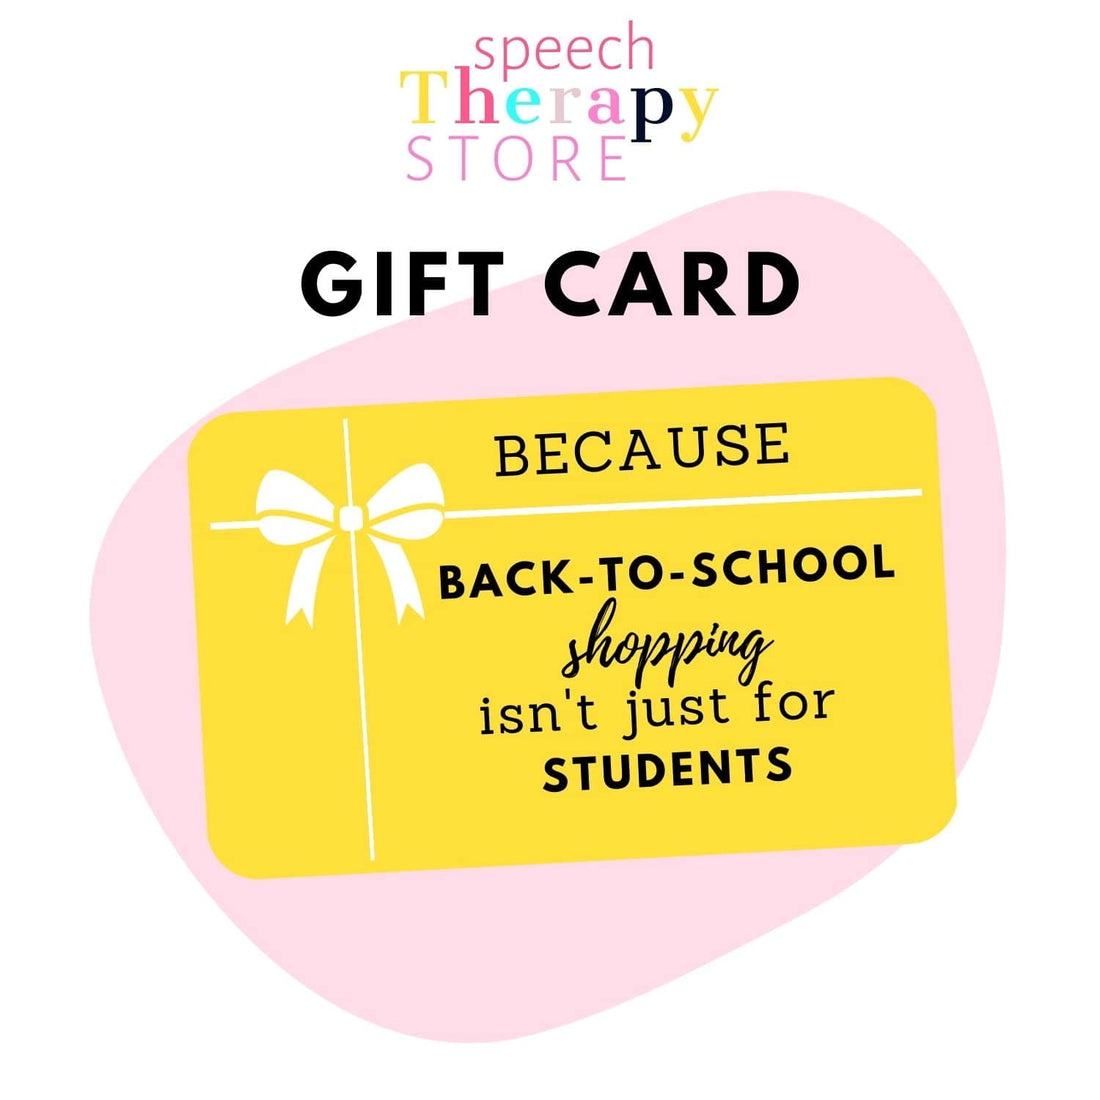 SPEECH THERAPY STORE GIFT CARD - PINK